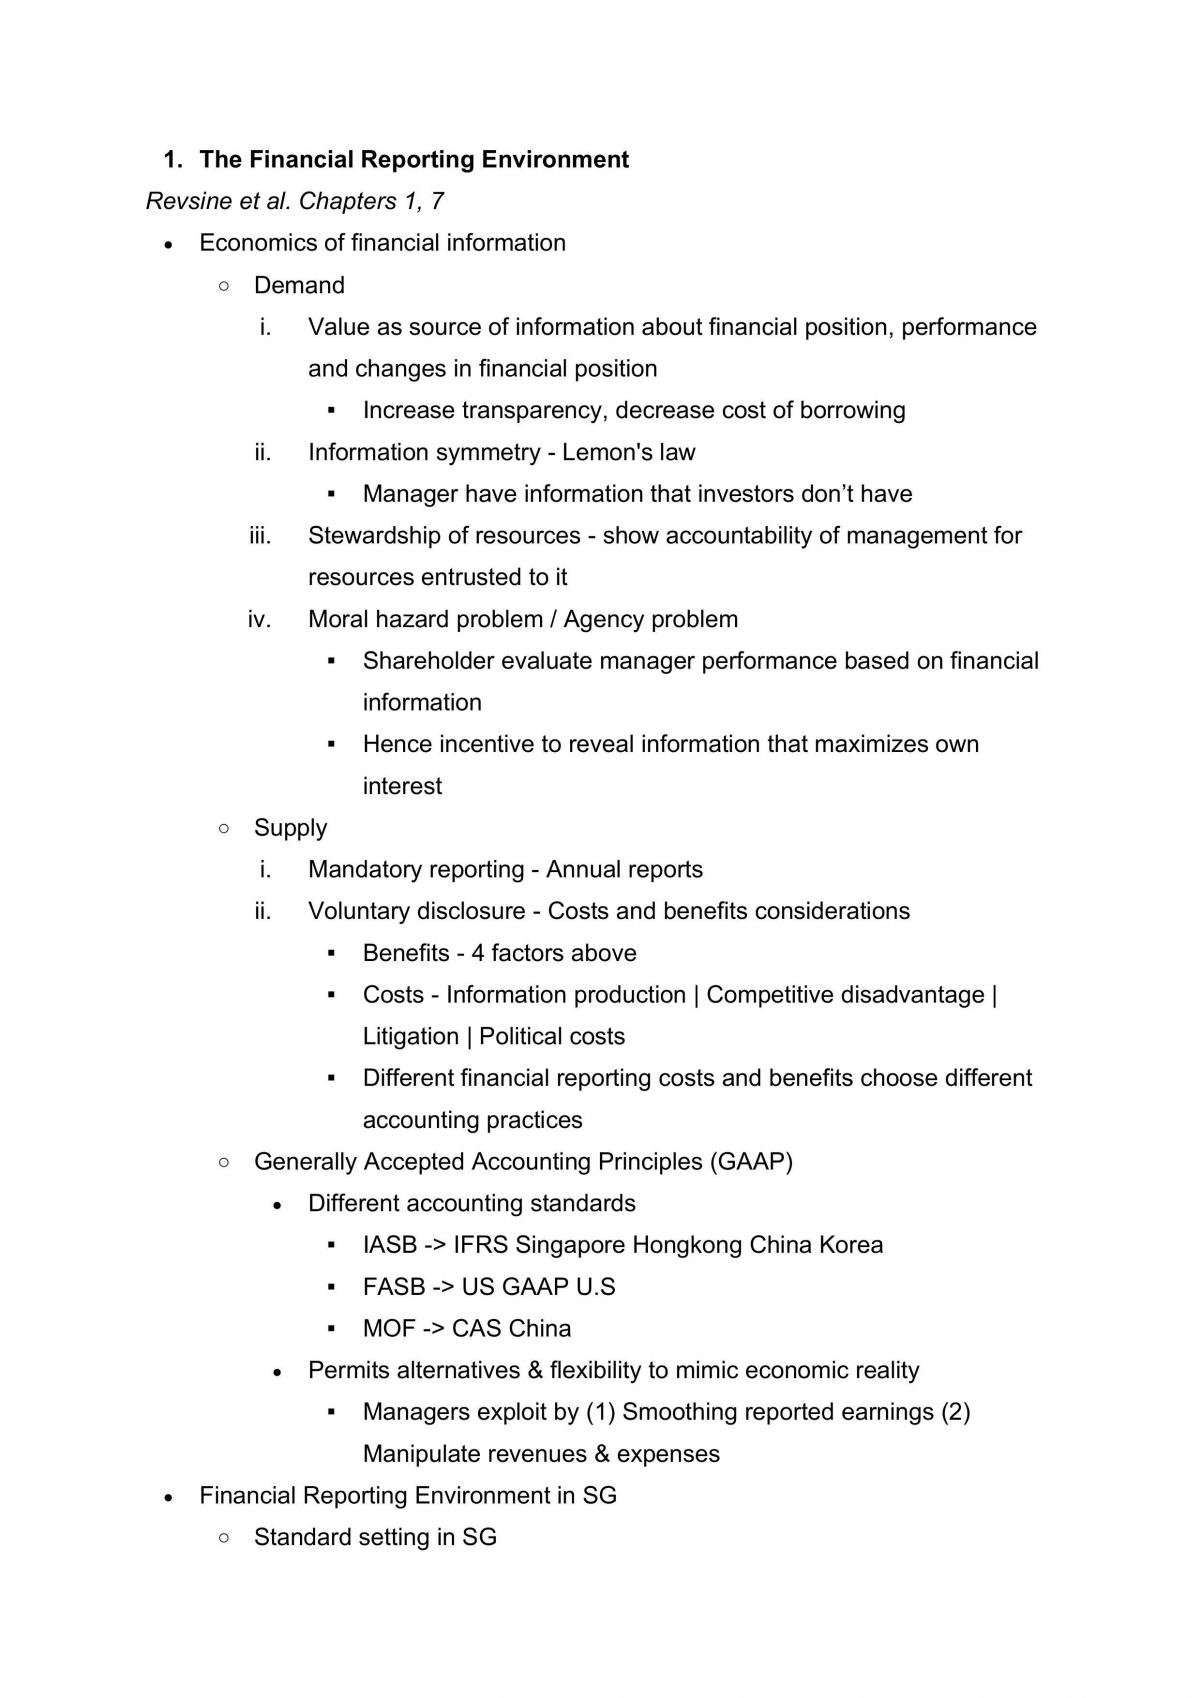 ACCT201 Corporate Reporting & Financial Analysis Notes - Page 4